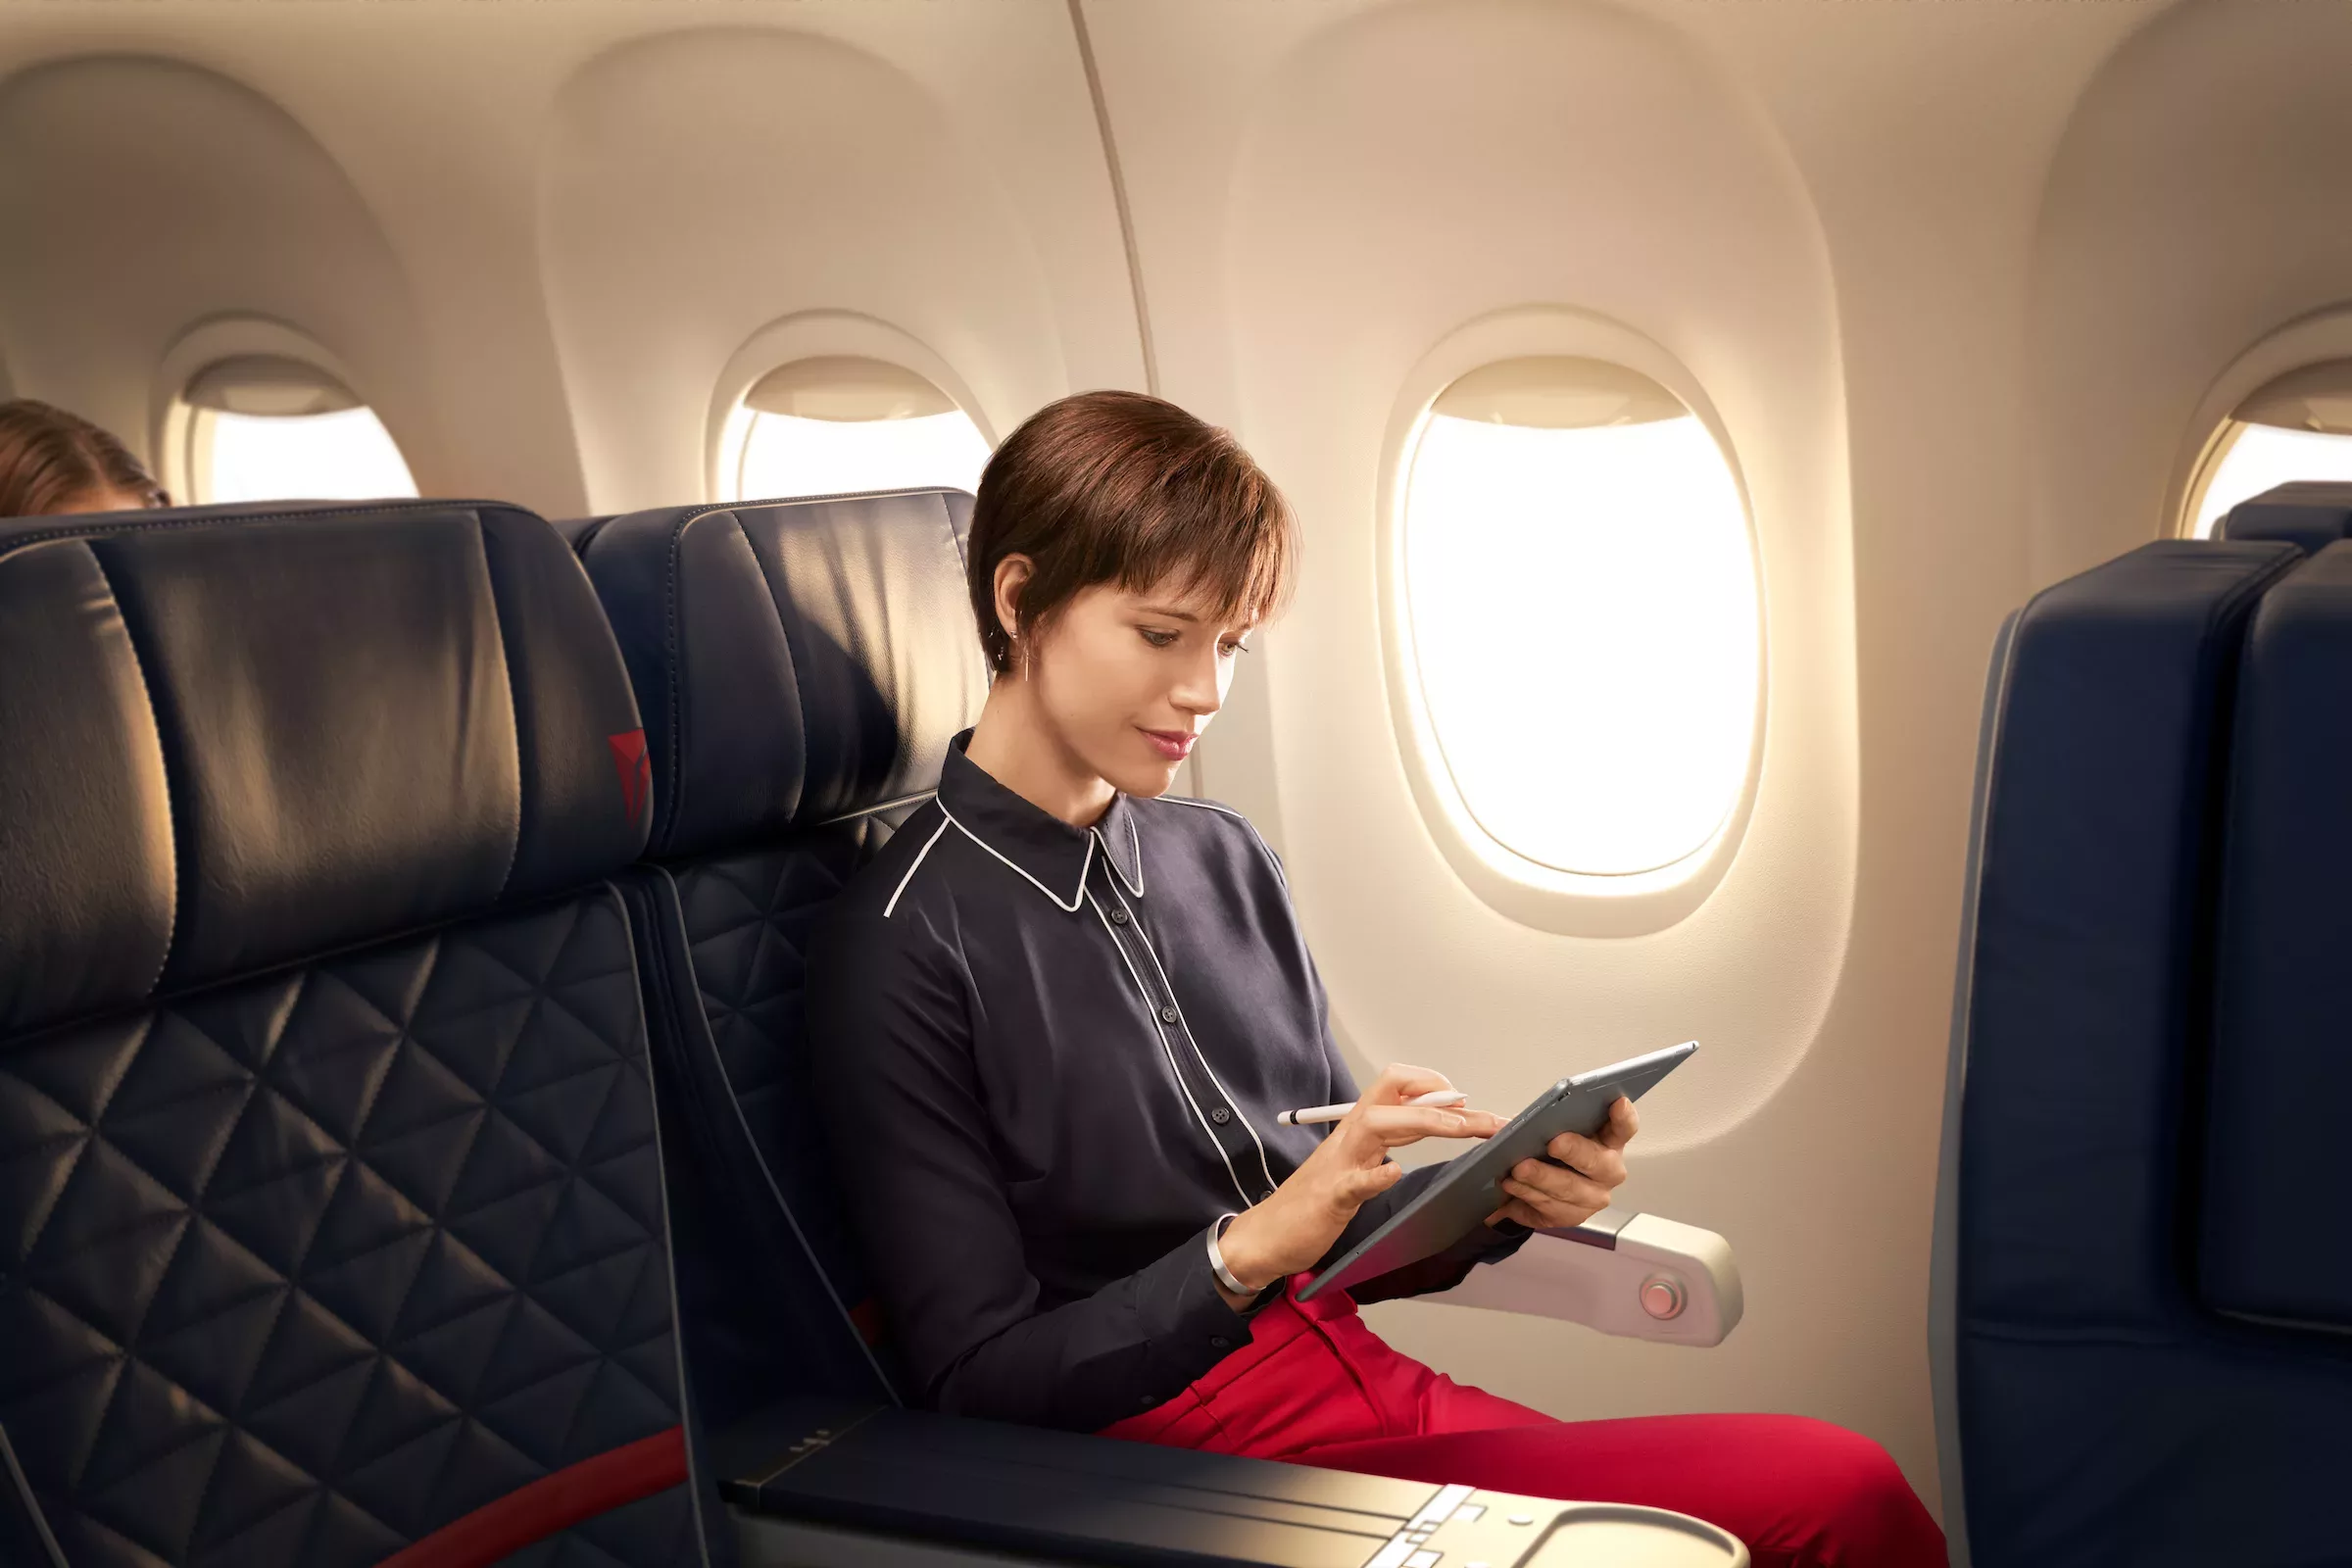 Delta Air Lines Now Rolling Out Free In-Flight Wi-Fi on Domestic Flights